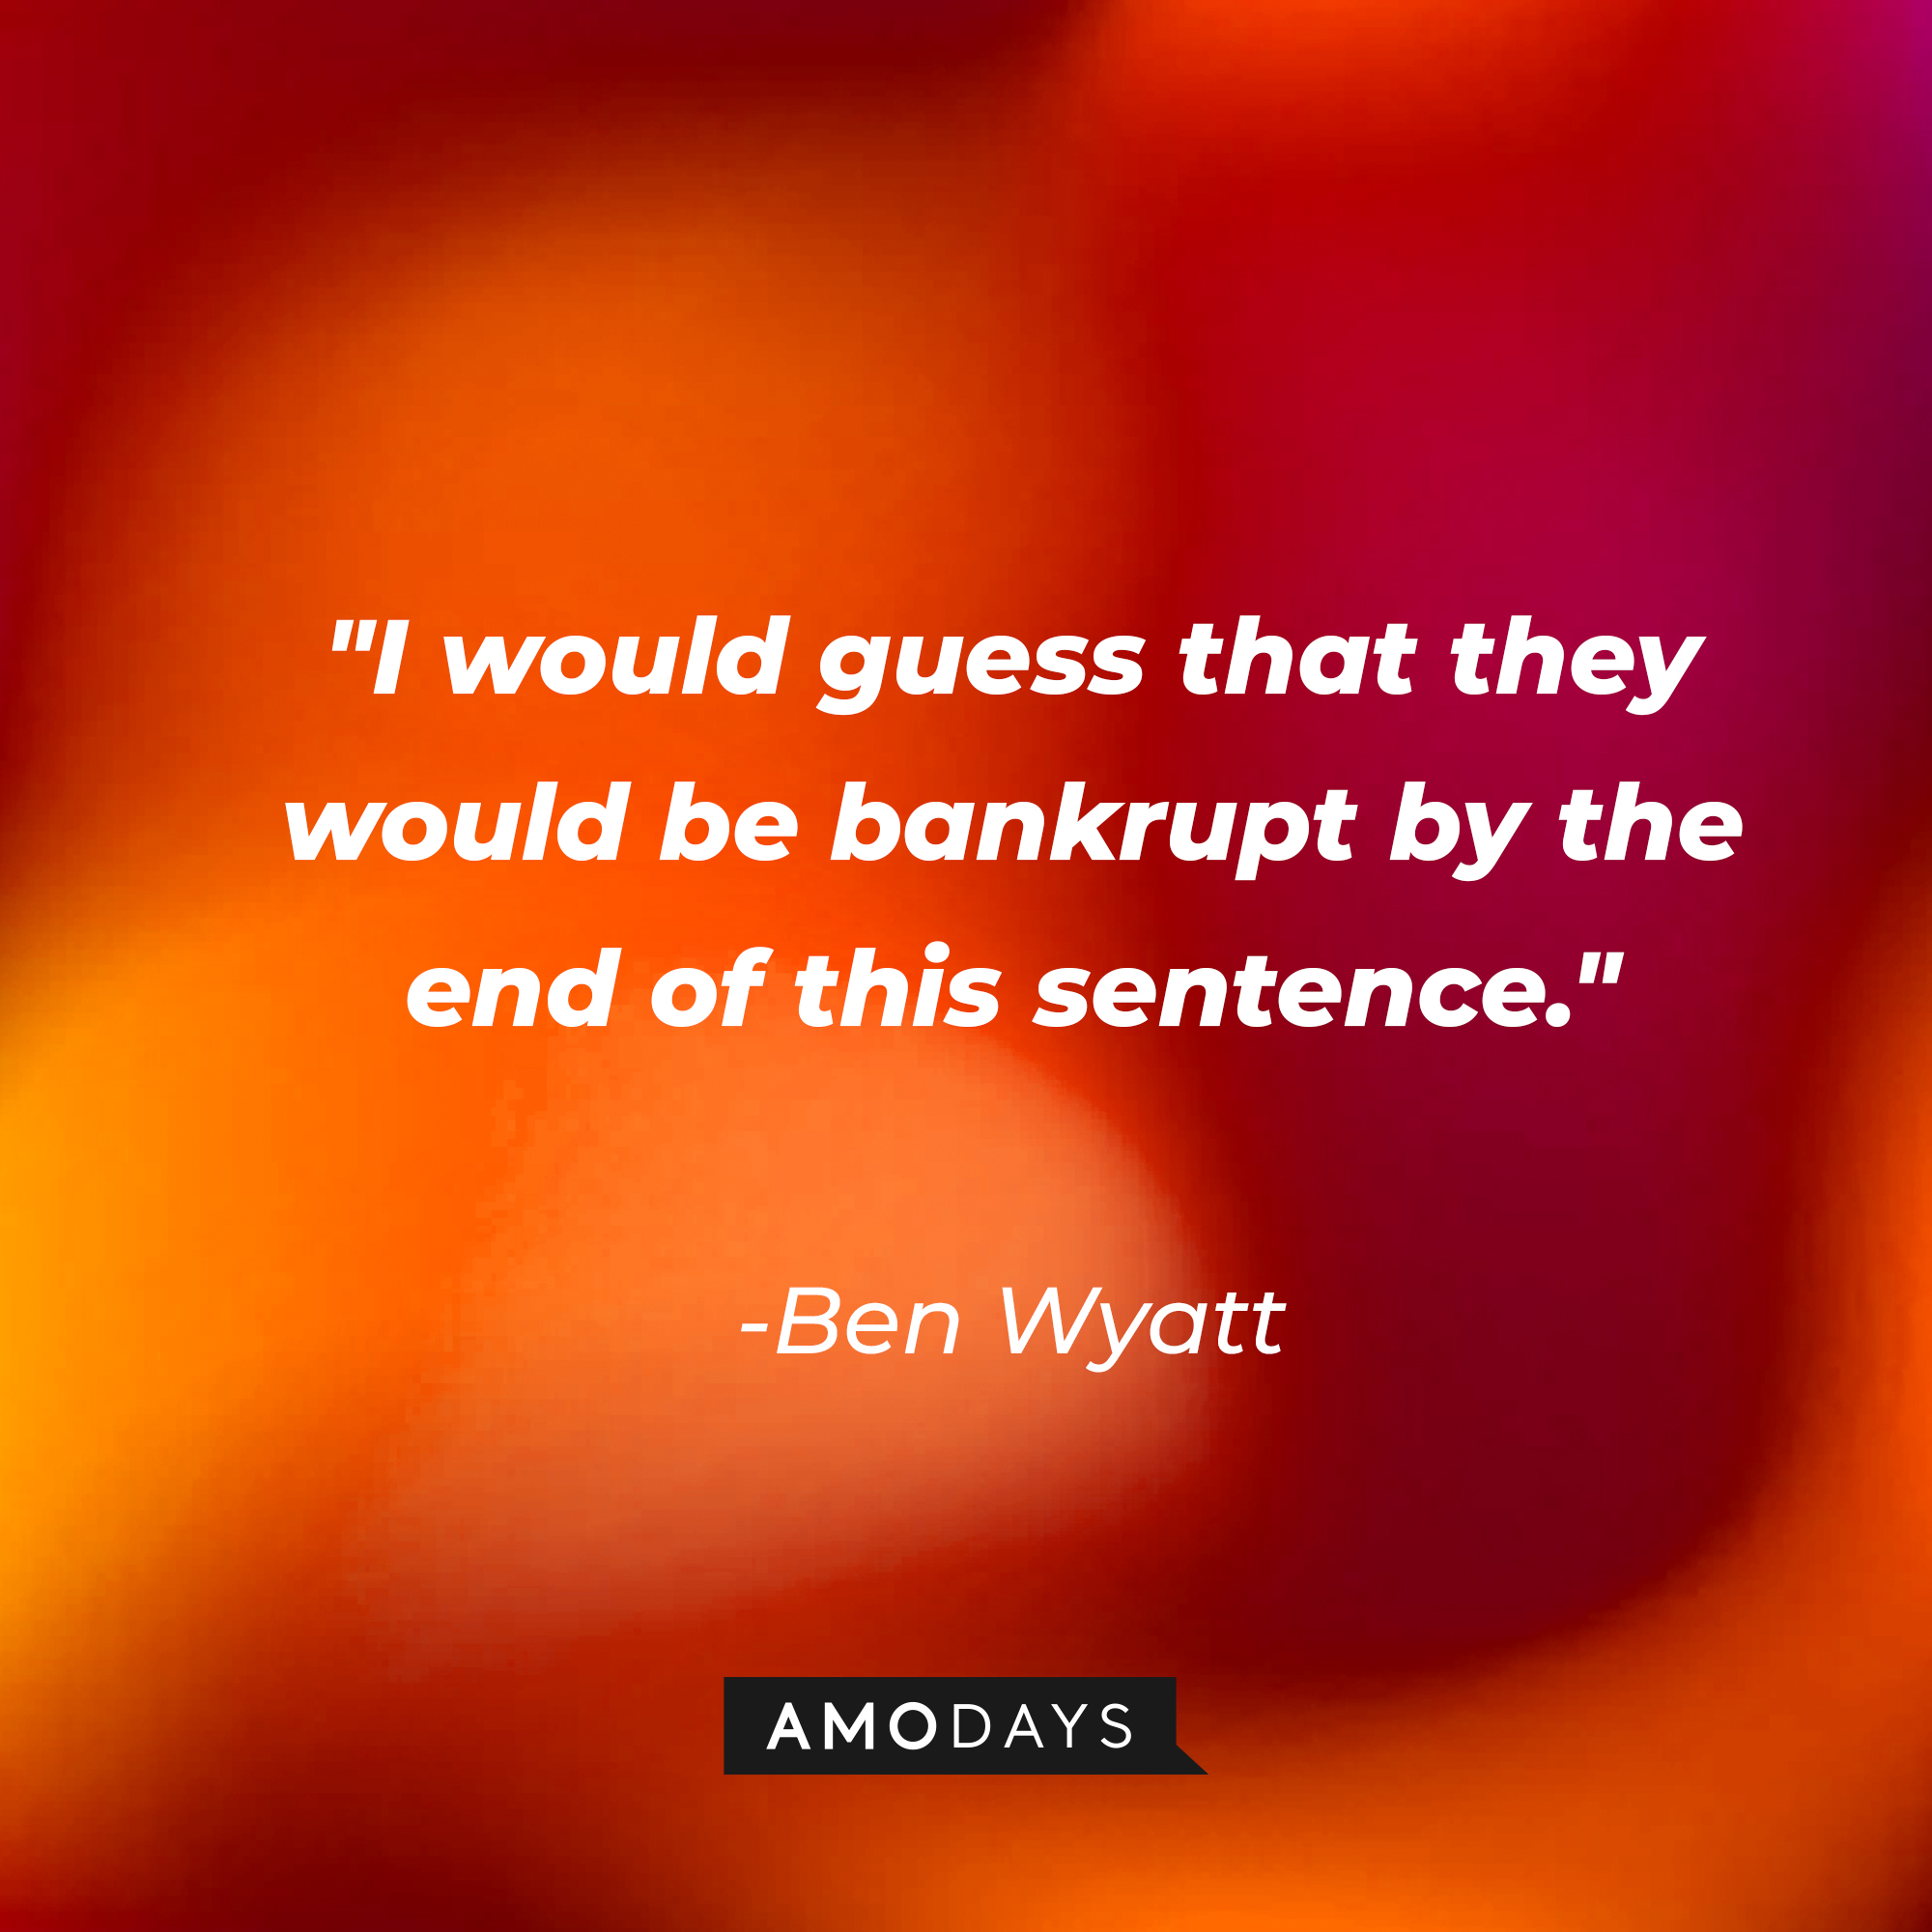 Ben Wyatt's quote: "I would guess that they would be bankrupt by the end of this sentence." | Source: AmoDays